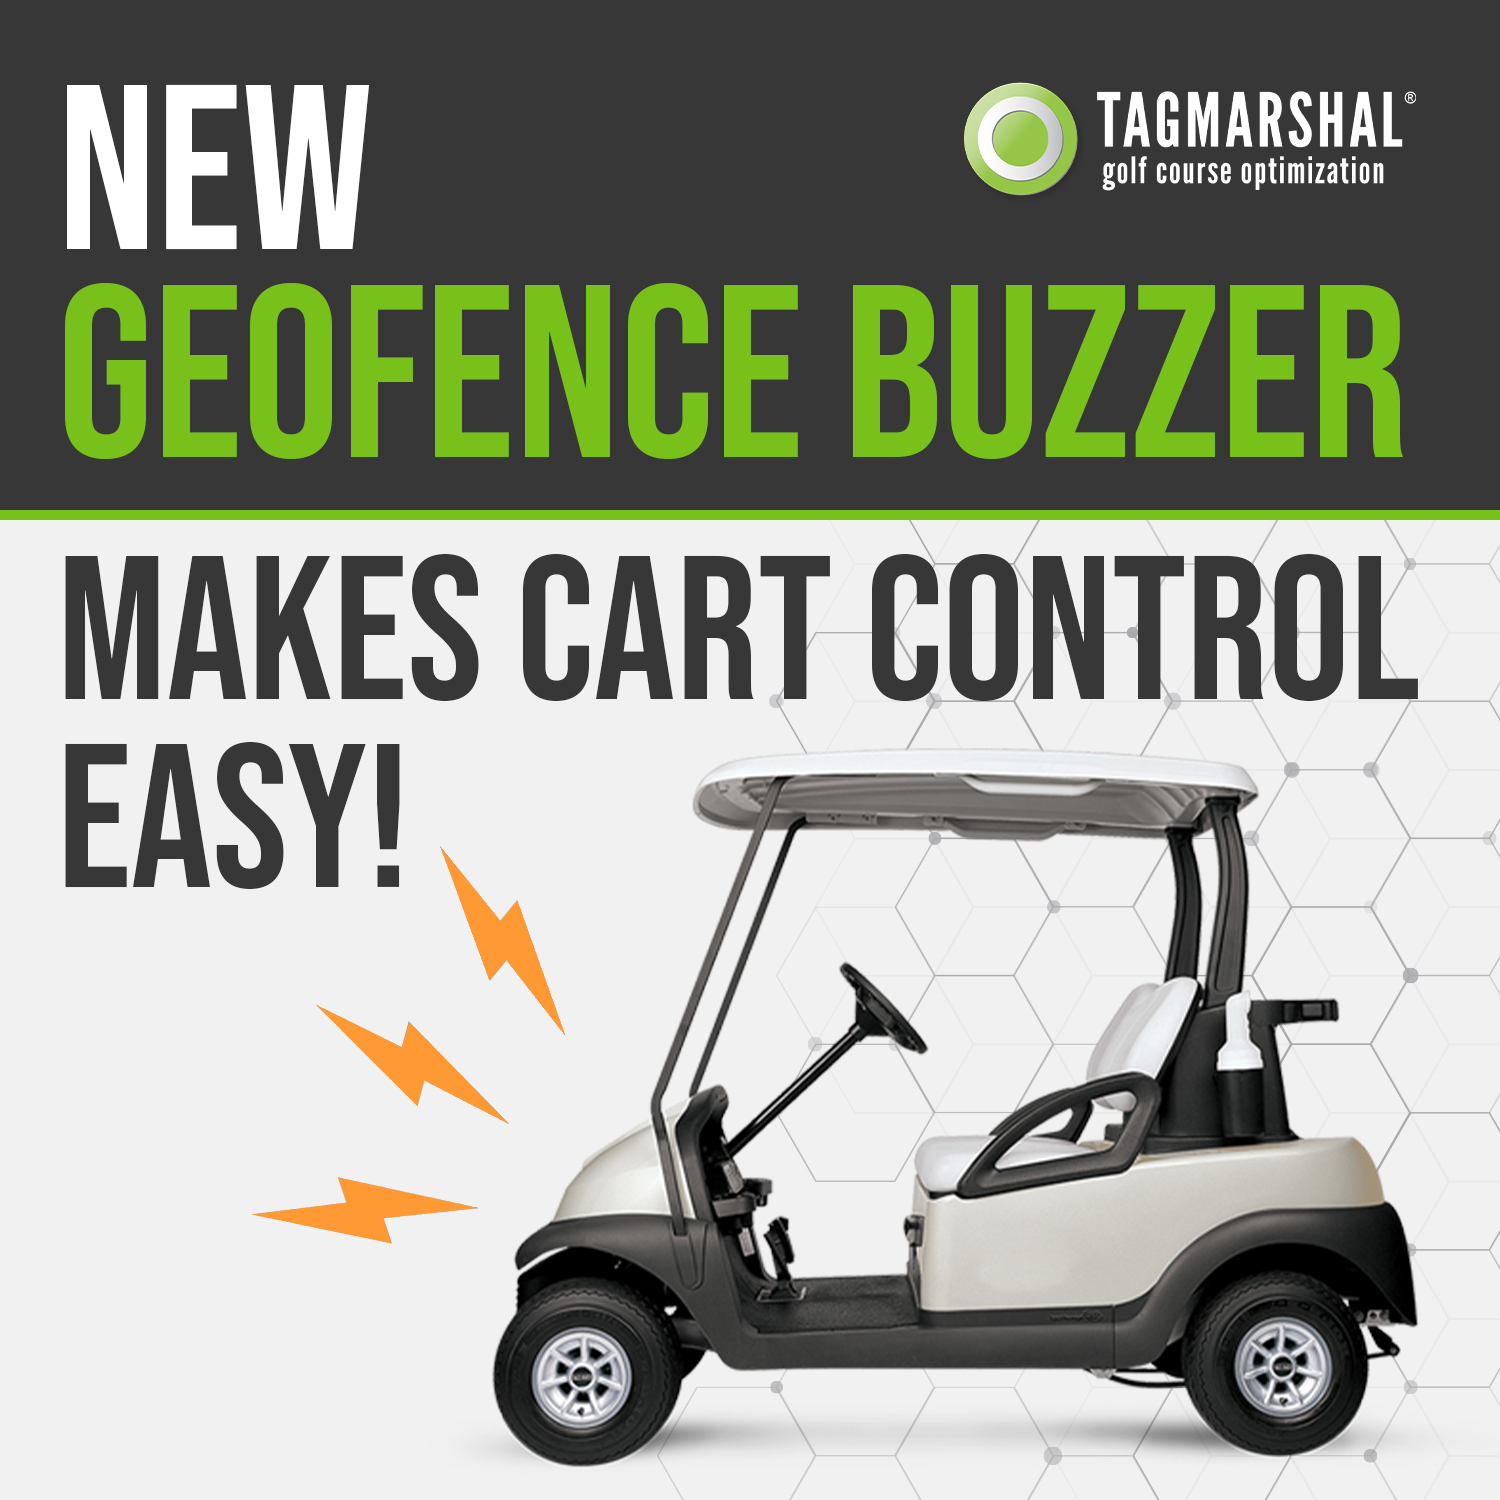 Tagmarshal Introduces New Geofence Buzzer for Carts